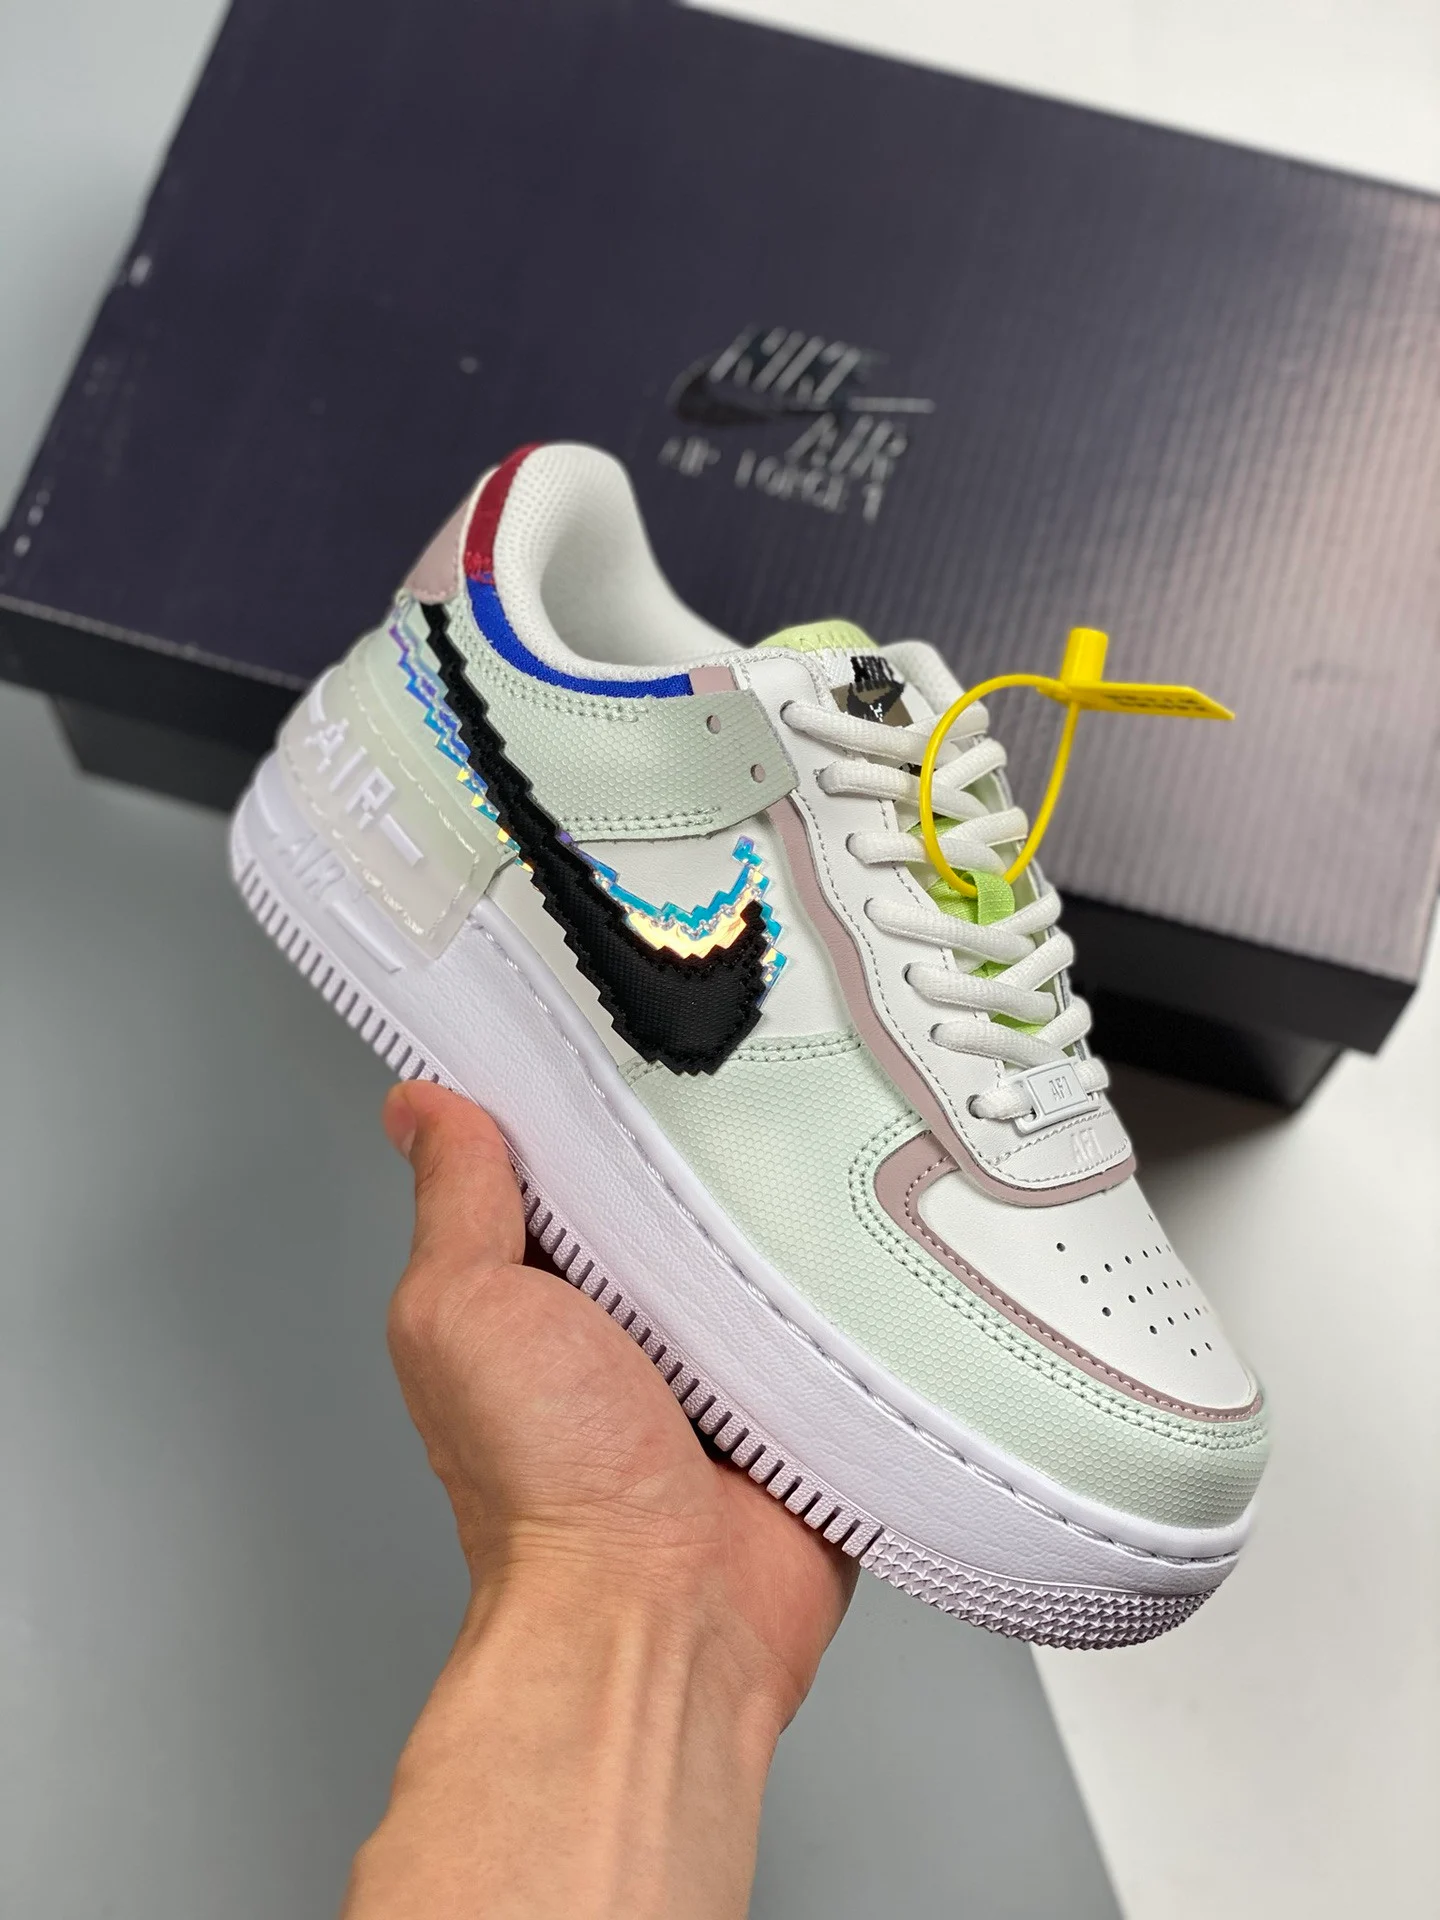 Nike Air Force 1 Shadow Pixel Barely Green White-Platinum Violet-Black For Sale